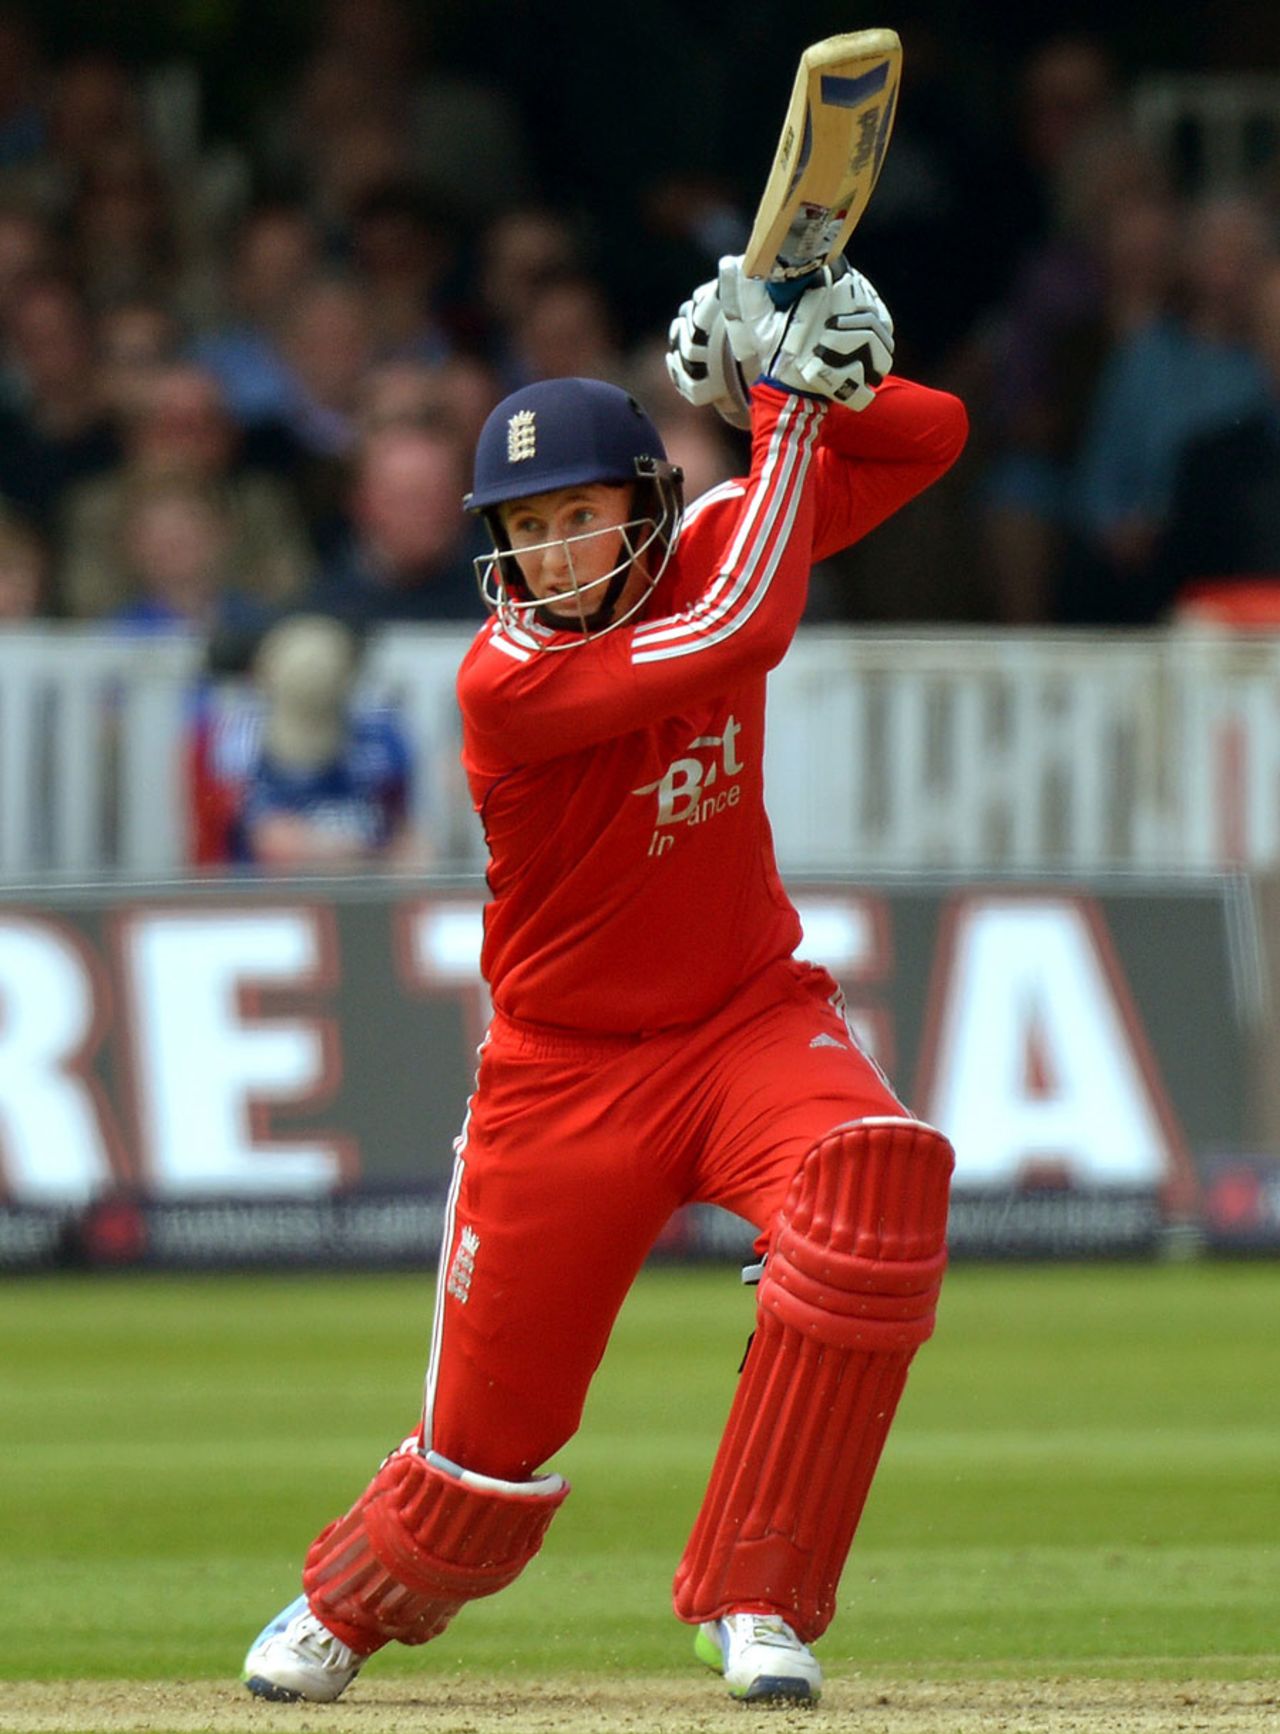 Joe Root drives through the covers, England v New Zealand, 1st ODI, Lord's, May 31, 2013